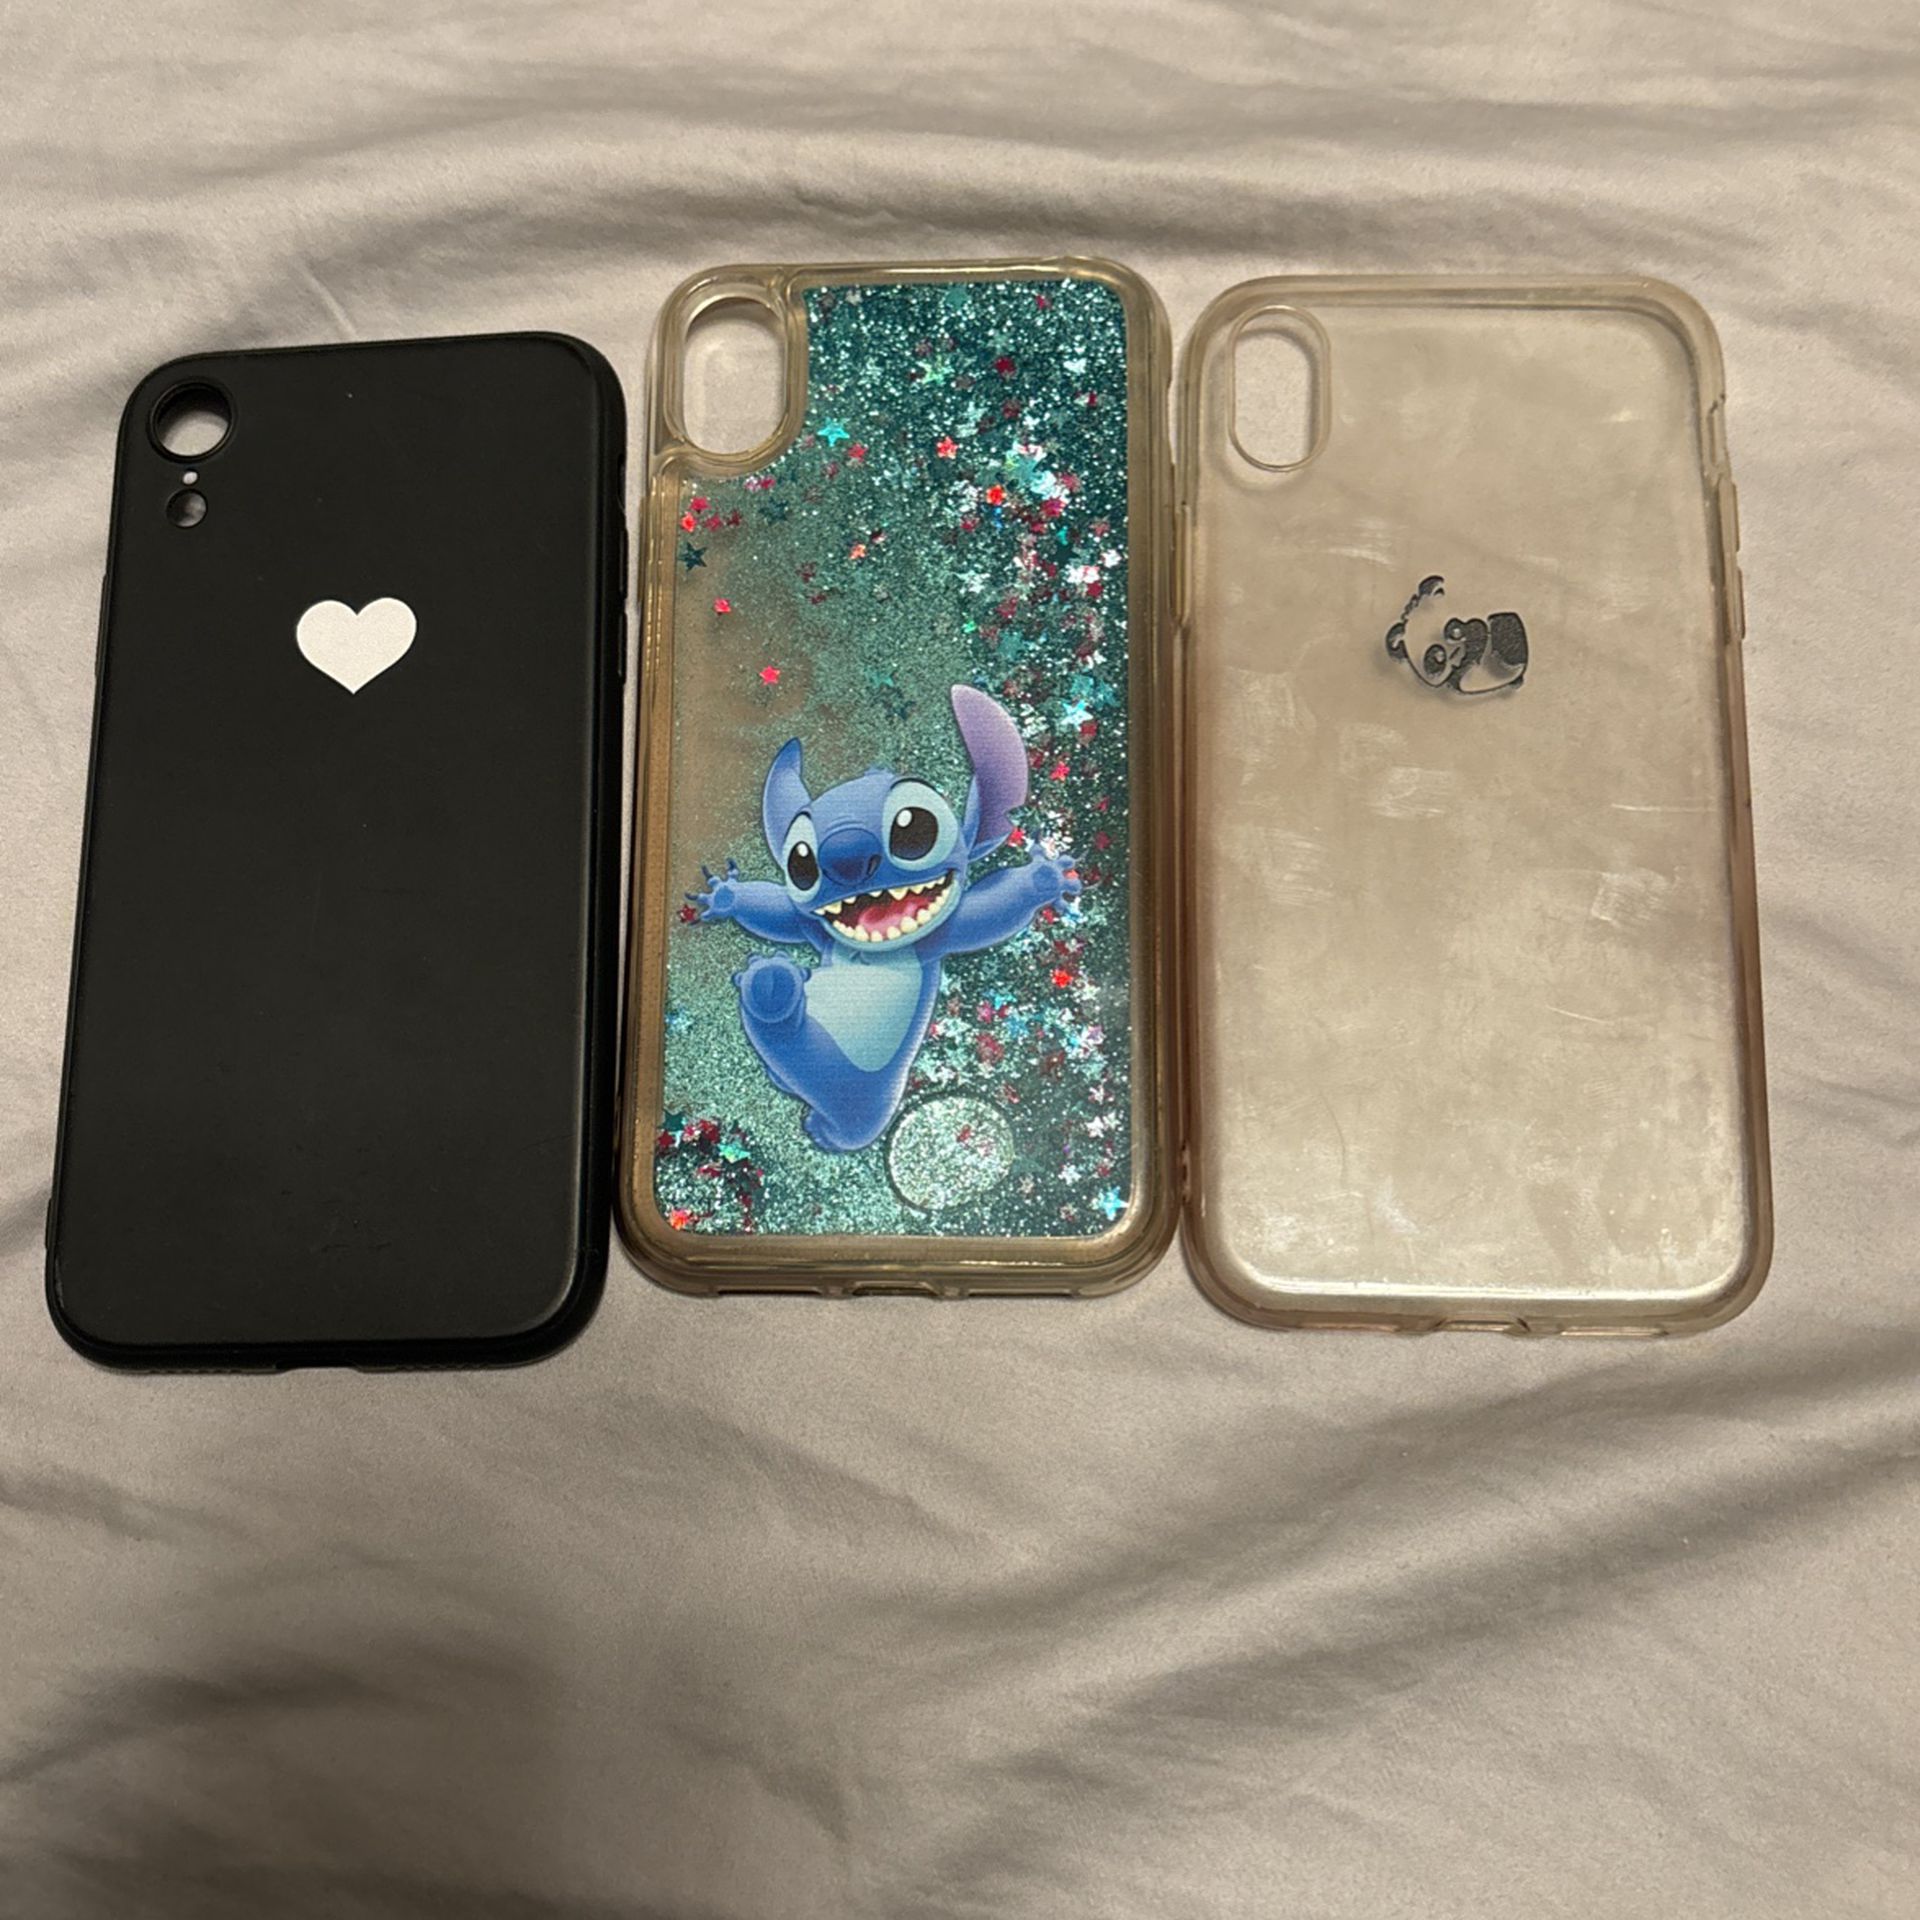 3 iPhone XR Cases